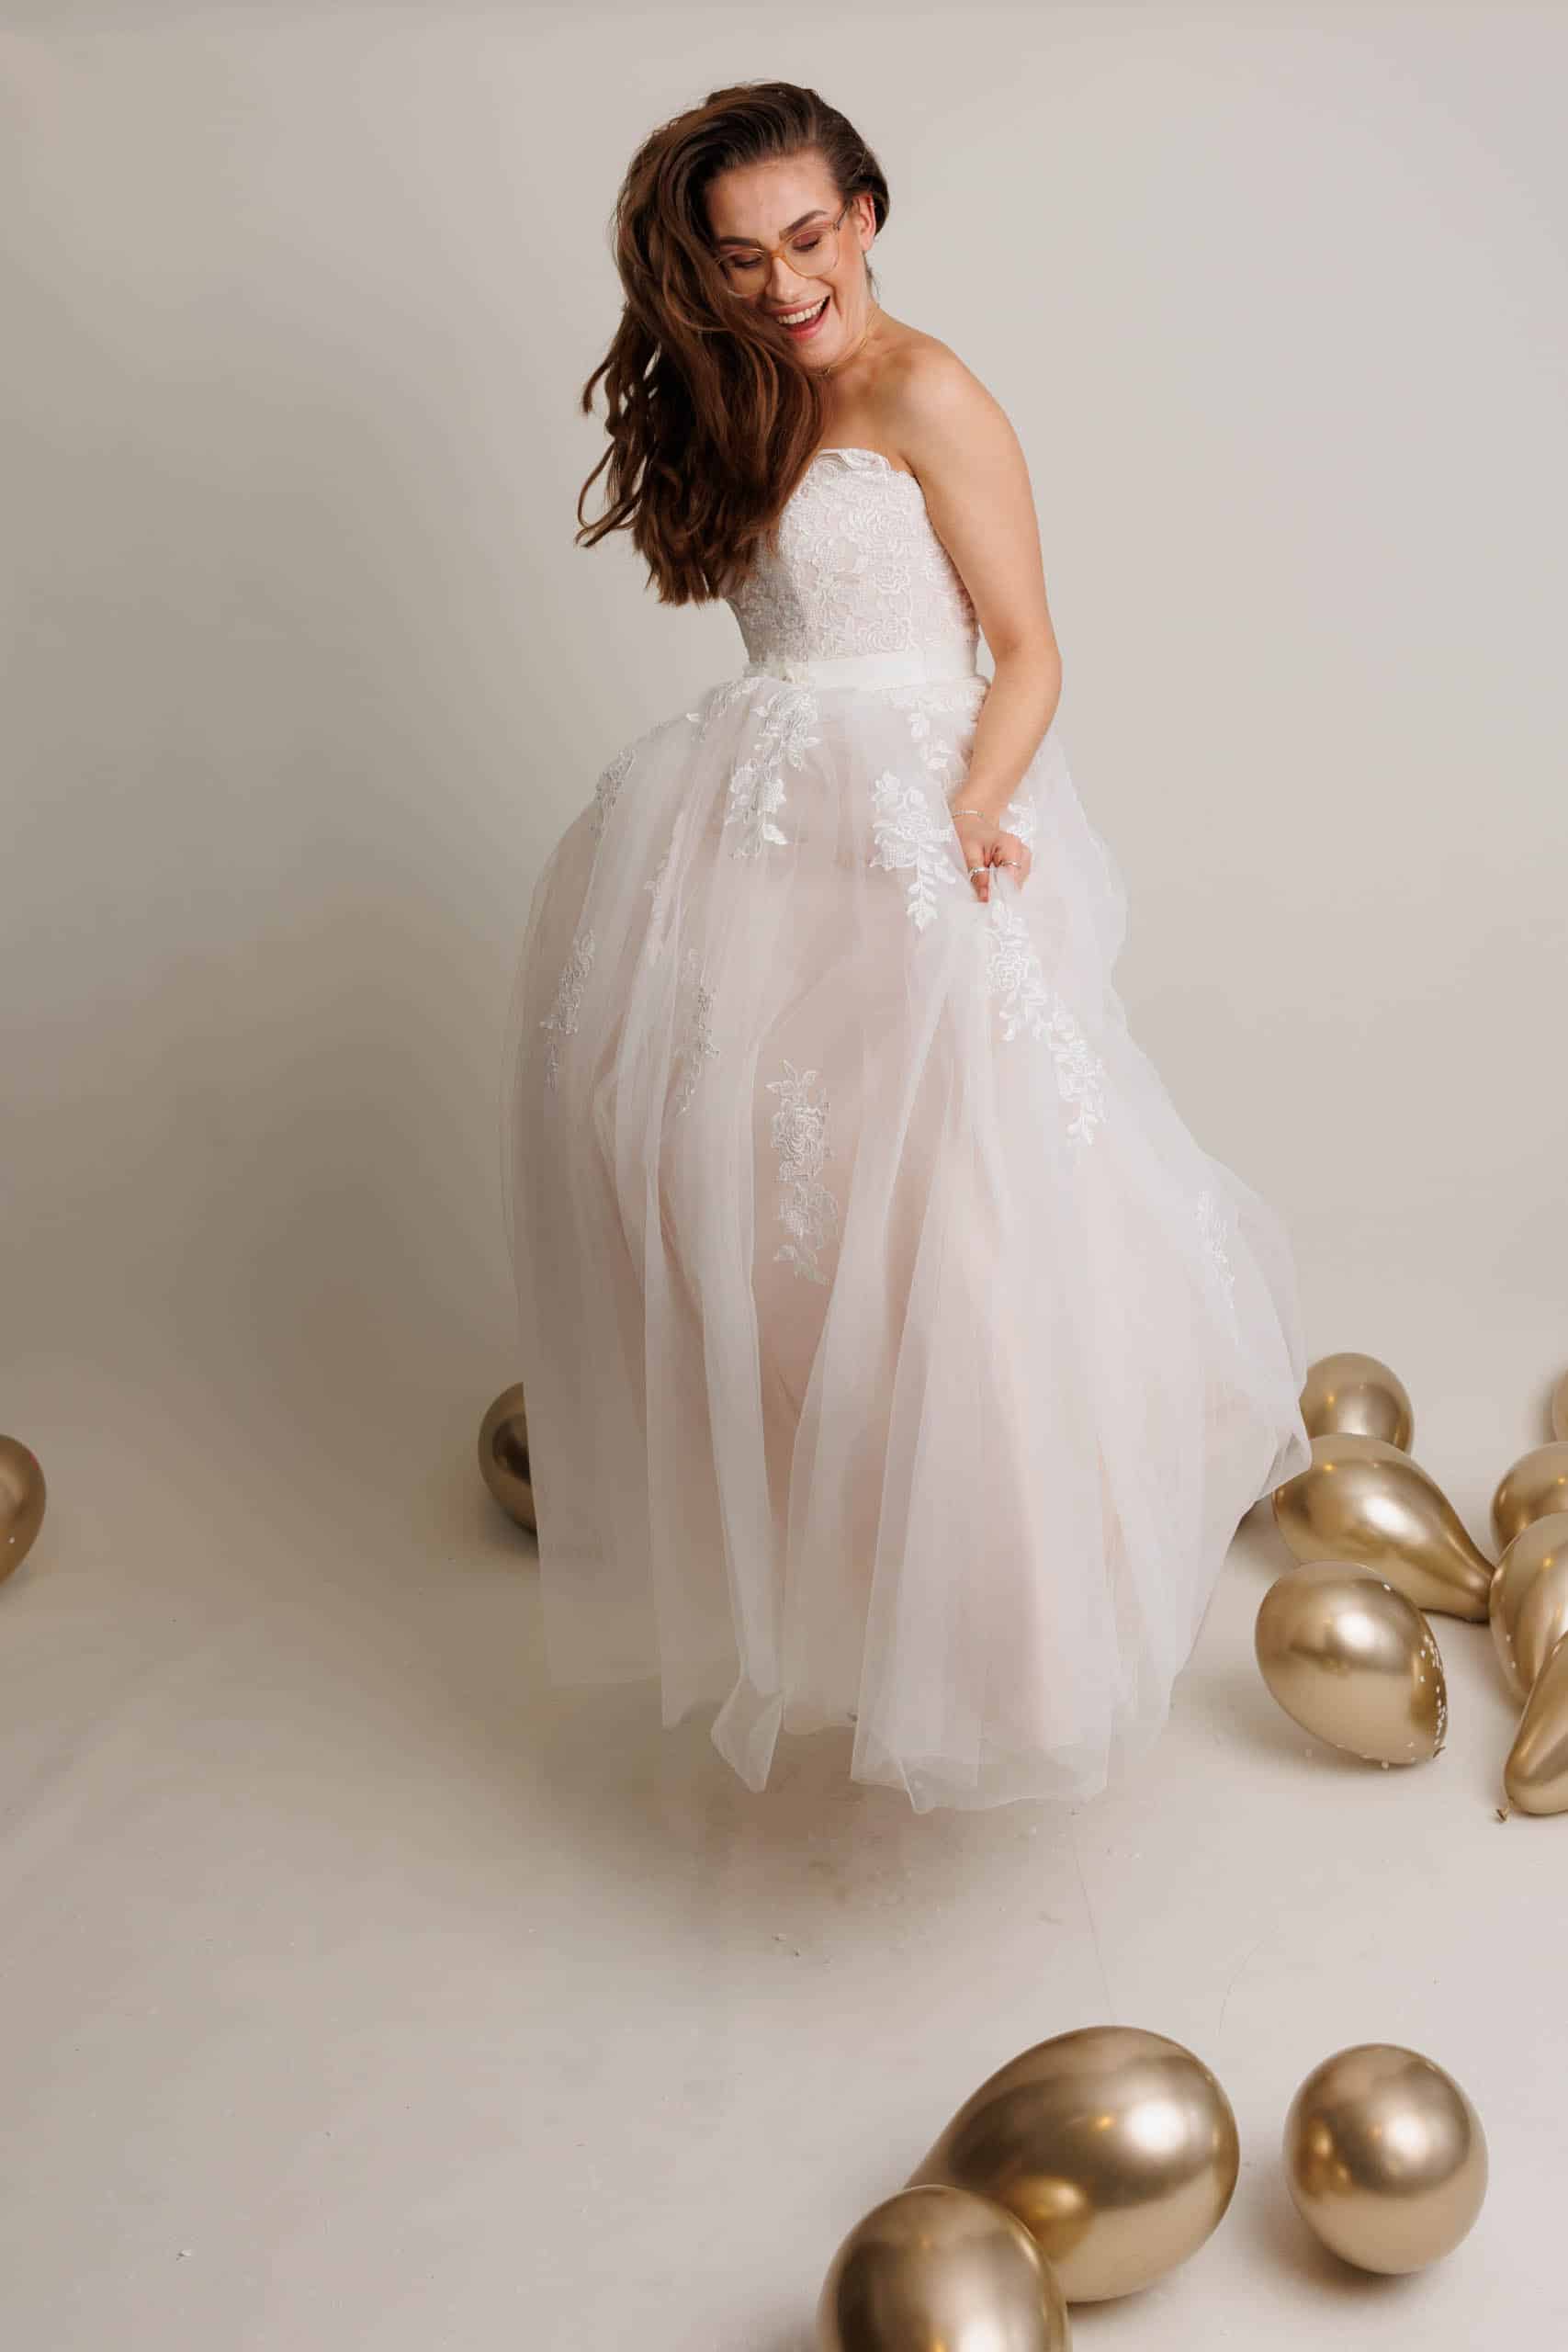 A bride in a wedding dress poses in front of gold balloons while trying on wedding dresses for fun.